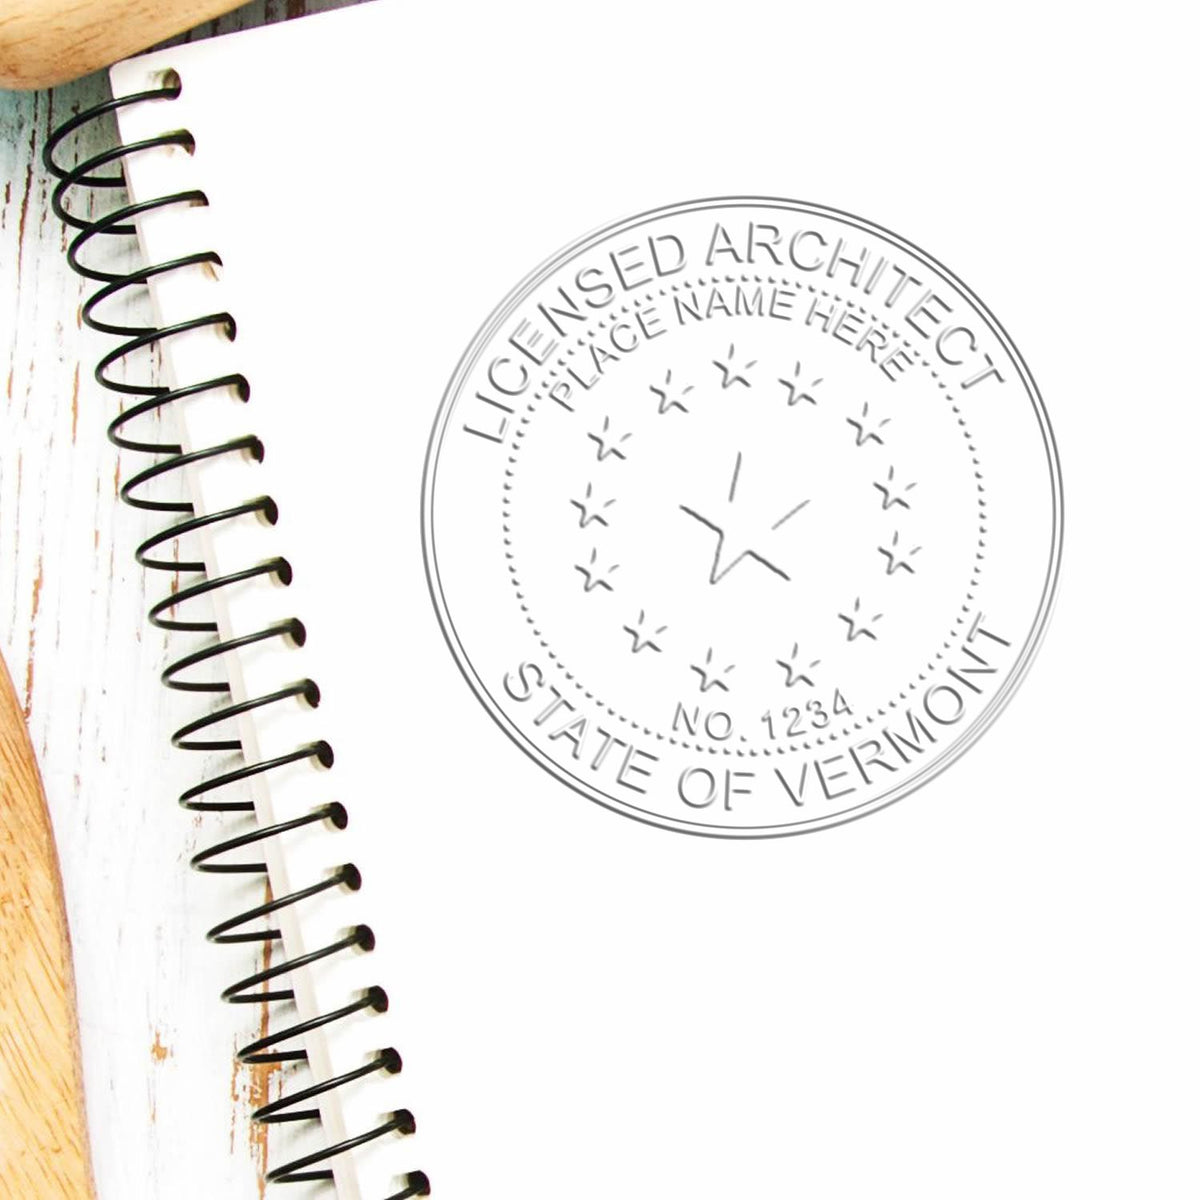 Extended Long Reach Vermont Architect Seal Embosser in use photo showing a stamped imprint of the Extended Long Reach Vermont Architect Seal Embosser